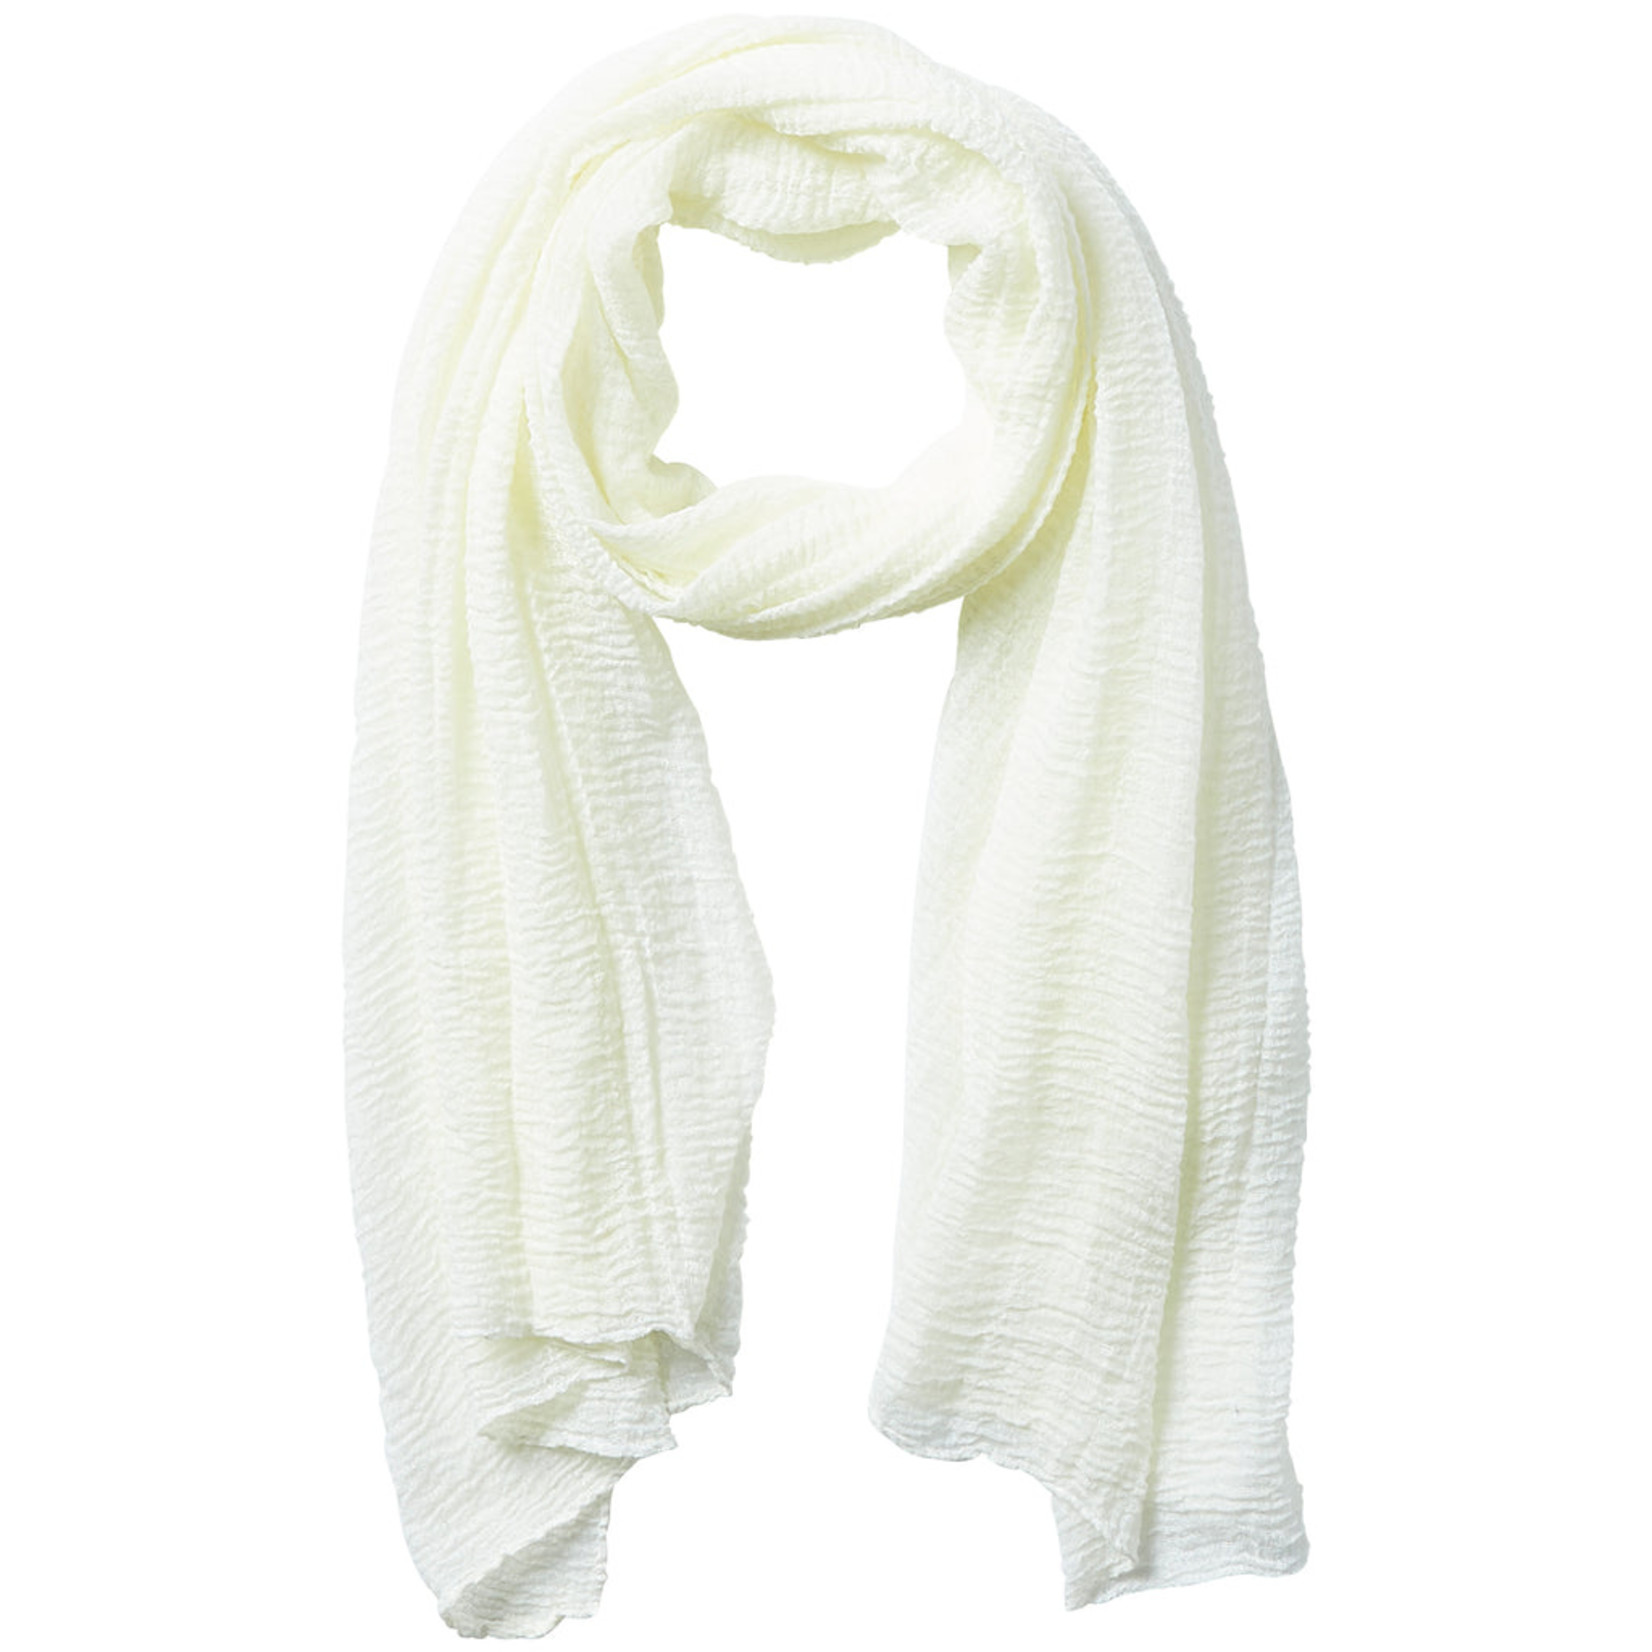 Hadley Wren - Insect Shield Scarf - Ivory